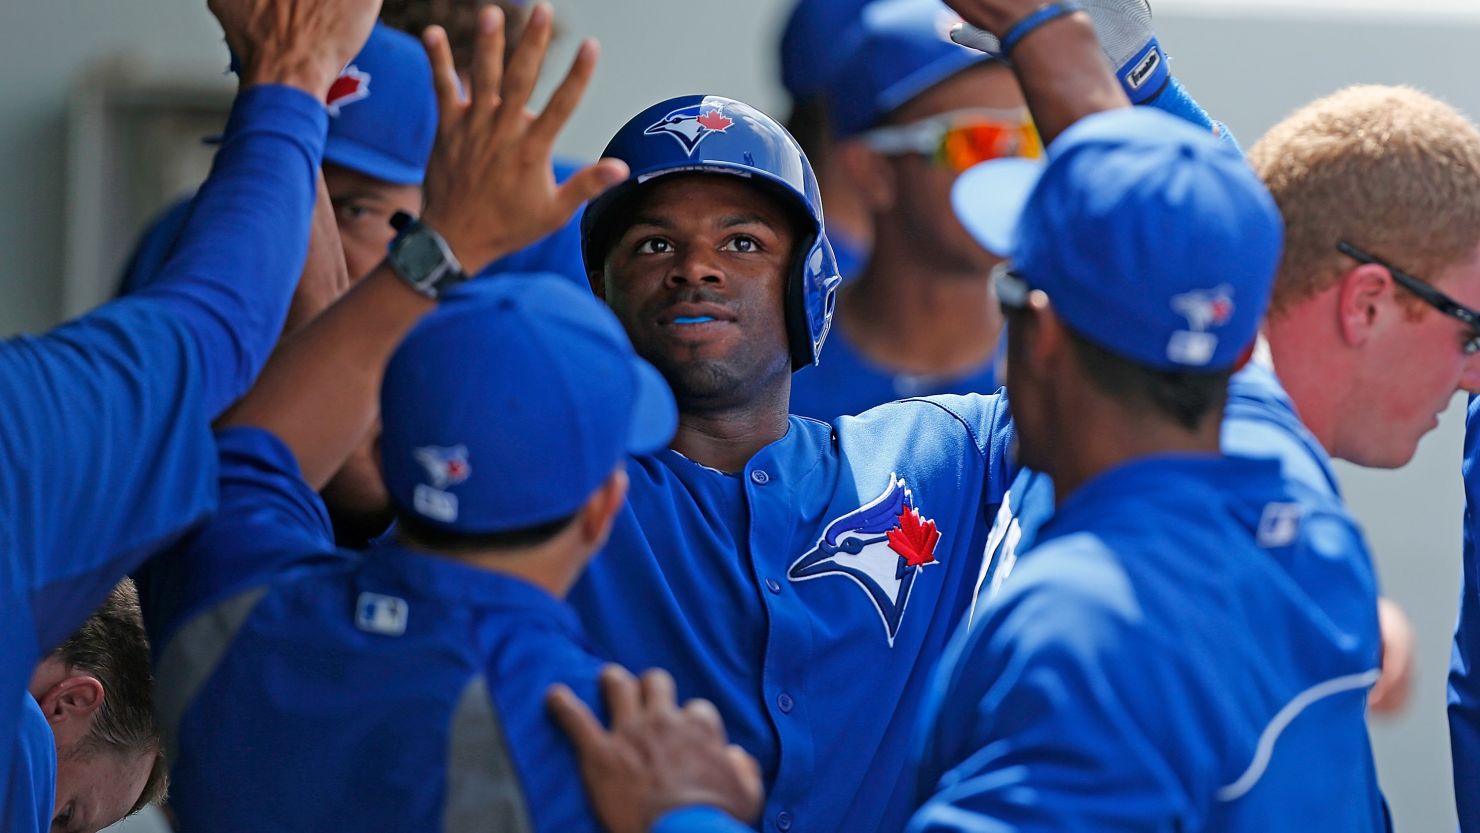 Rajai Davis of the Toronto Blue Jays is congratulated after a home run in a spring training game last week in Fort Myers, Florida.